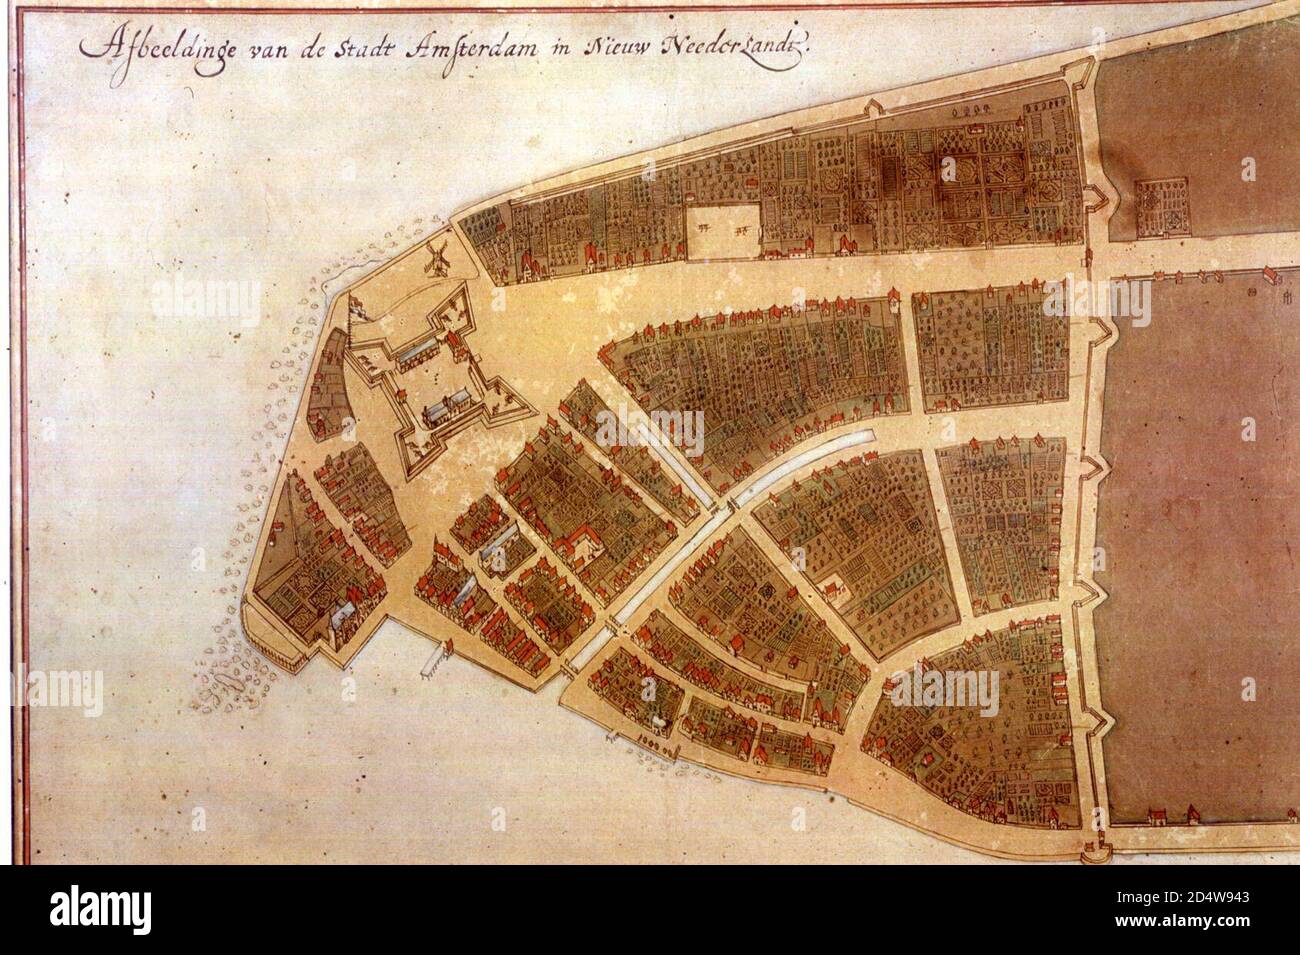 The original en:Castello Plan. Full size photograph of manuscript map in the Biblioteca Medicea-Laurenziana of Florence, Italy. The Castello plan is the earliest known plan of Amsterdam (so not New Amsterdam, as you can see on the picture), and the only one dating from the Dutch period. The text at the top of the image states: 'Image of the city Amsterdam in New Netherland'. Stock Photo